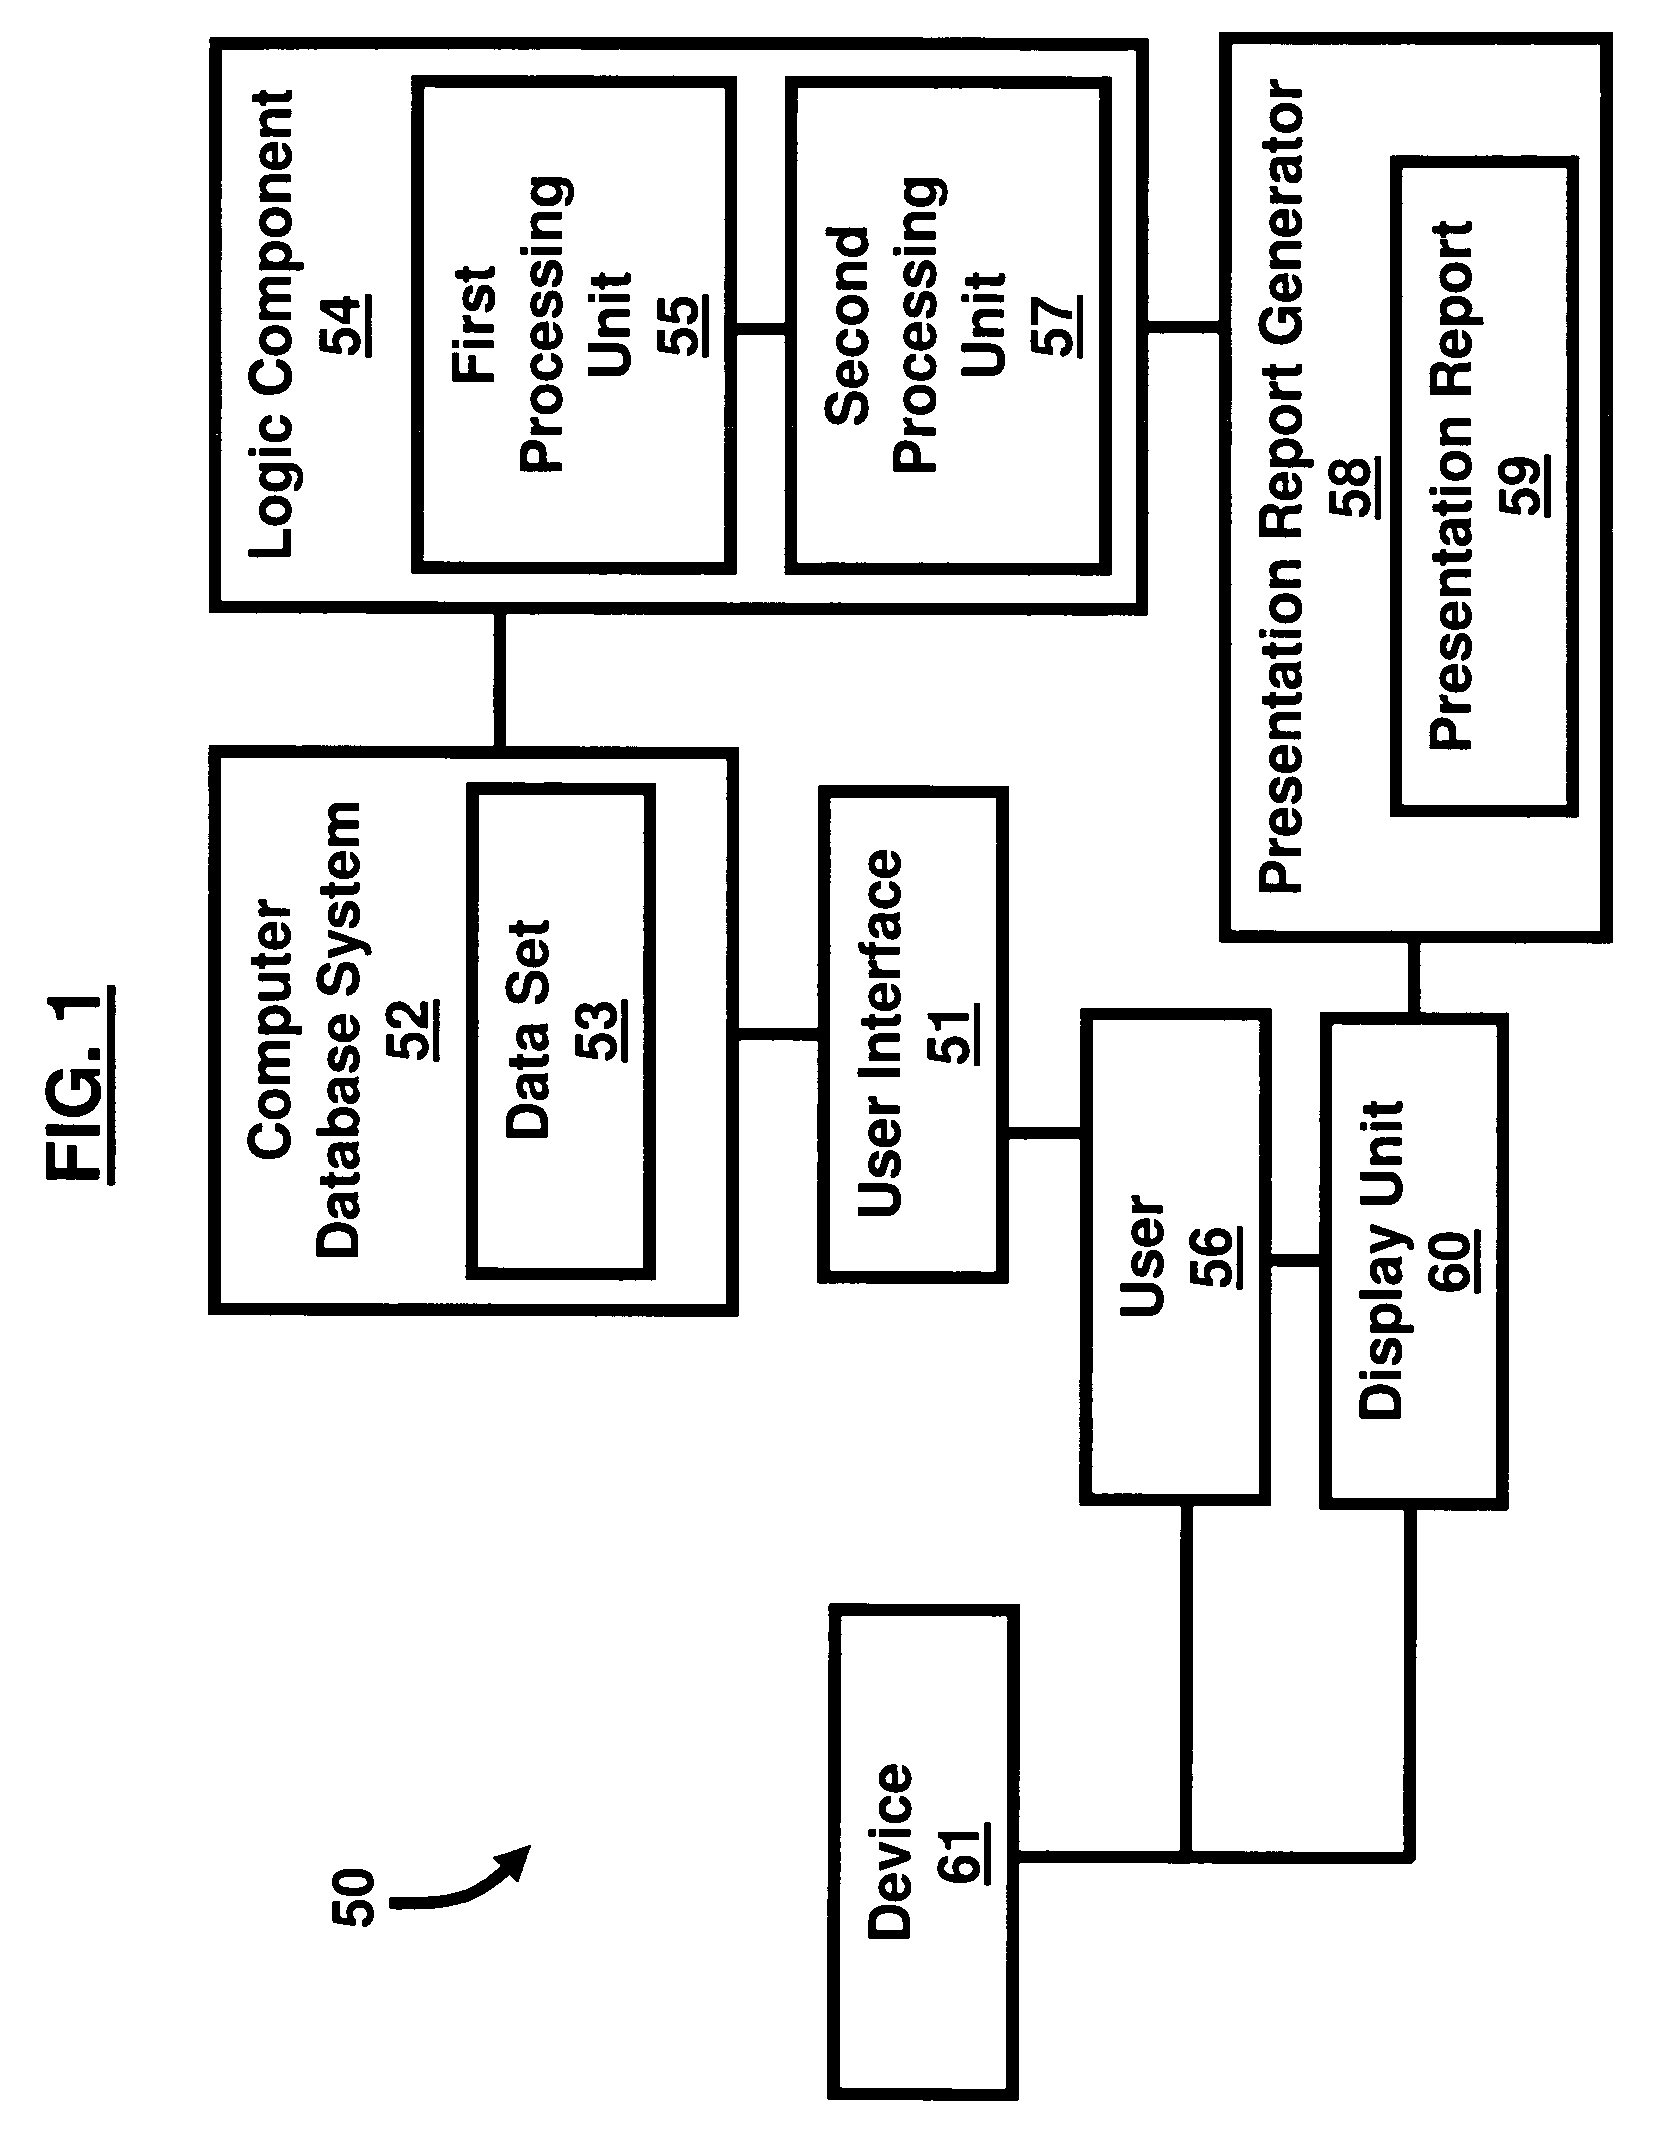 Domain independent system and method of automating data aggregation and presentation